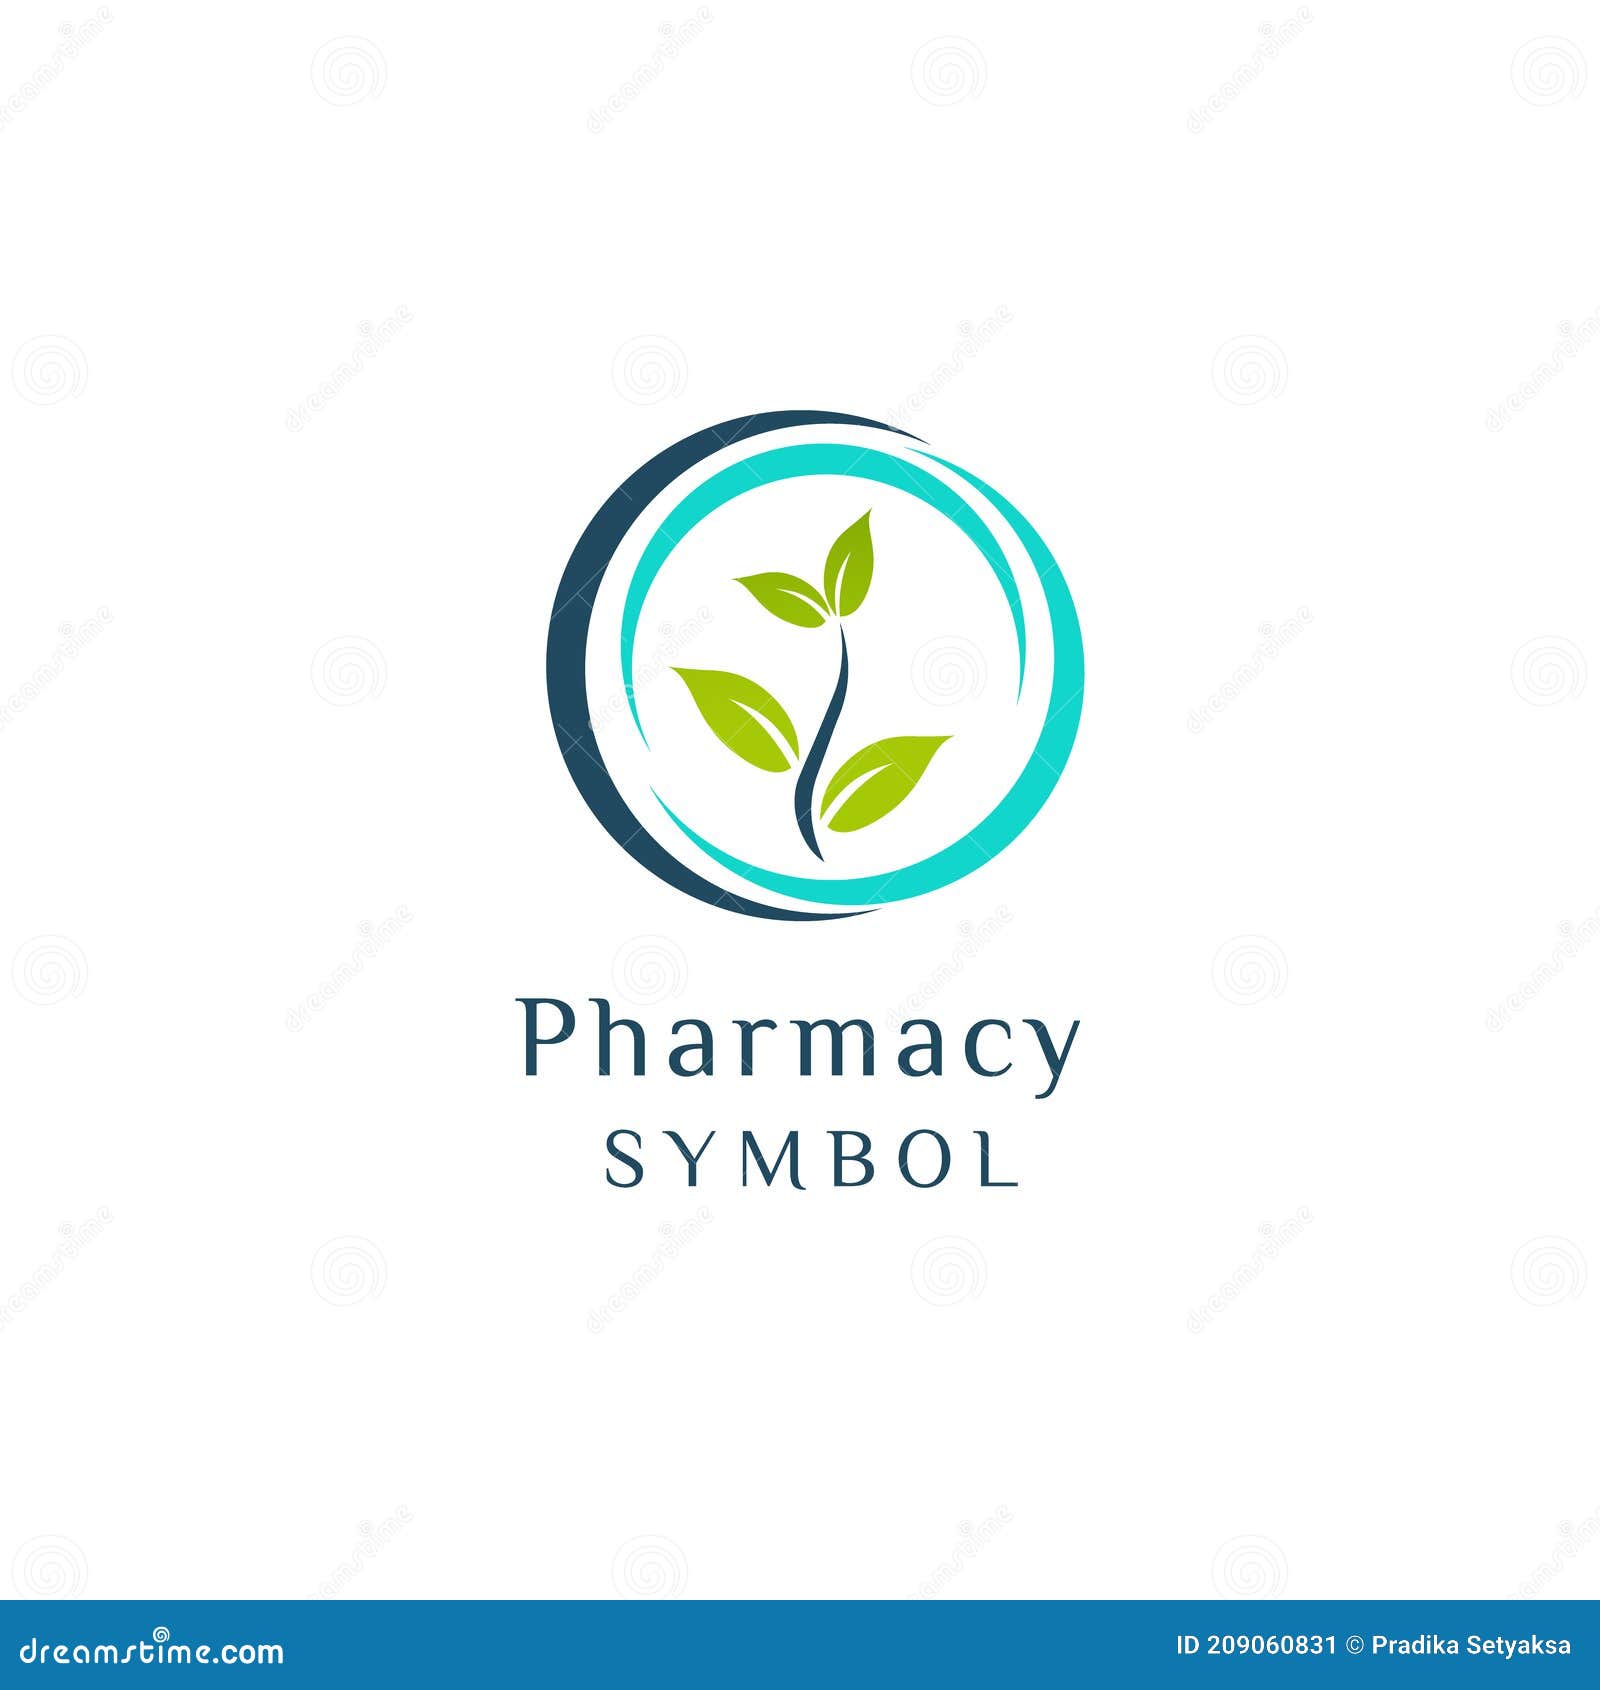 A Simple Logo for Pharmacy Related Business in Simple Style that Looks ...